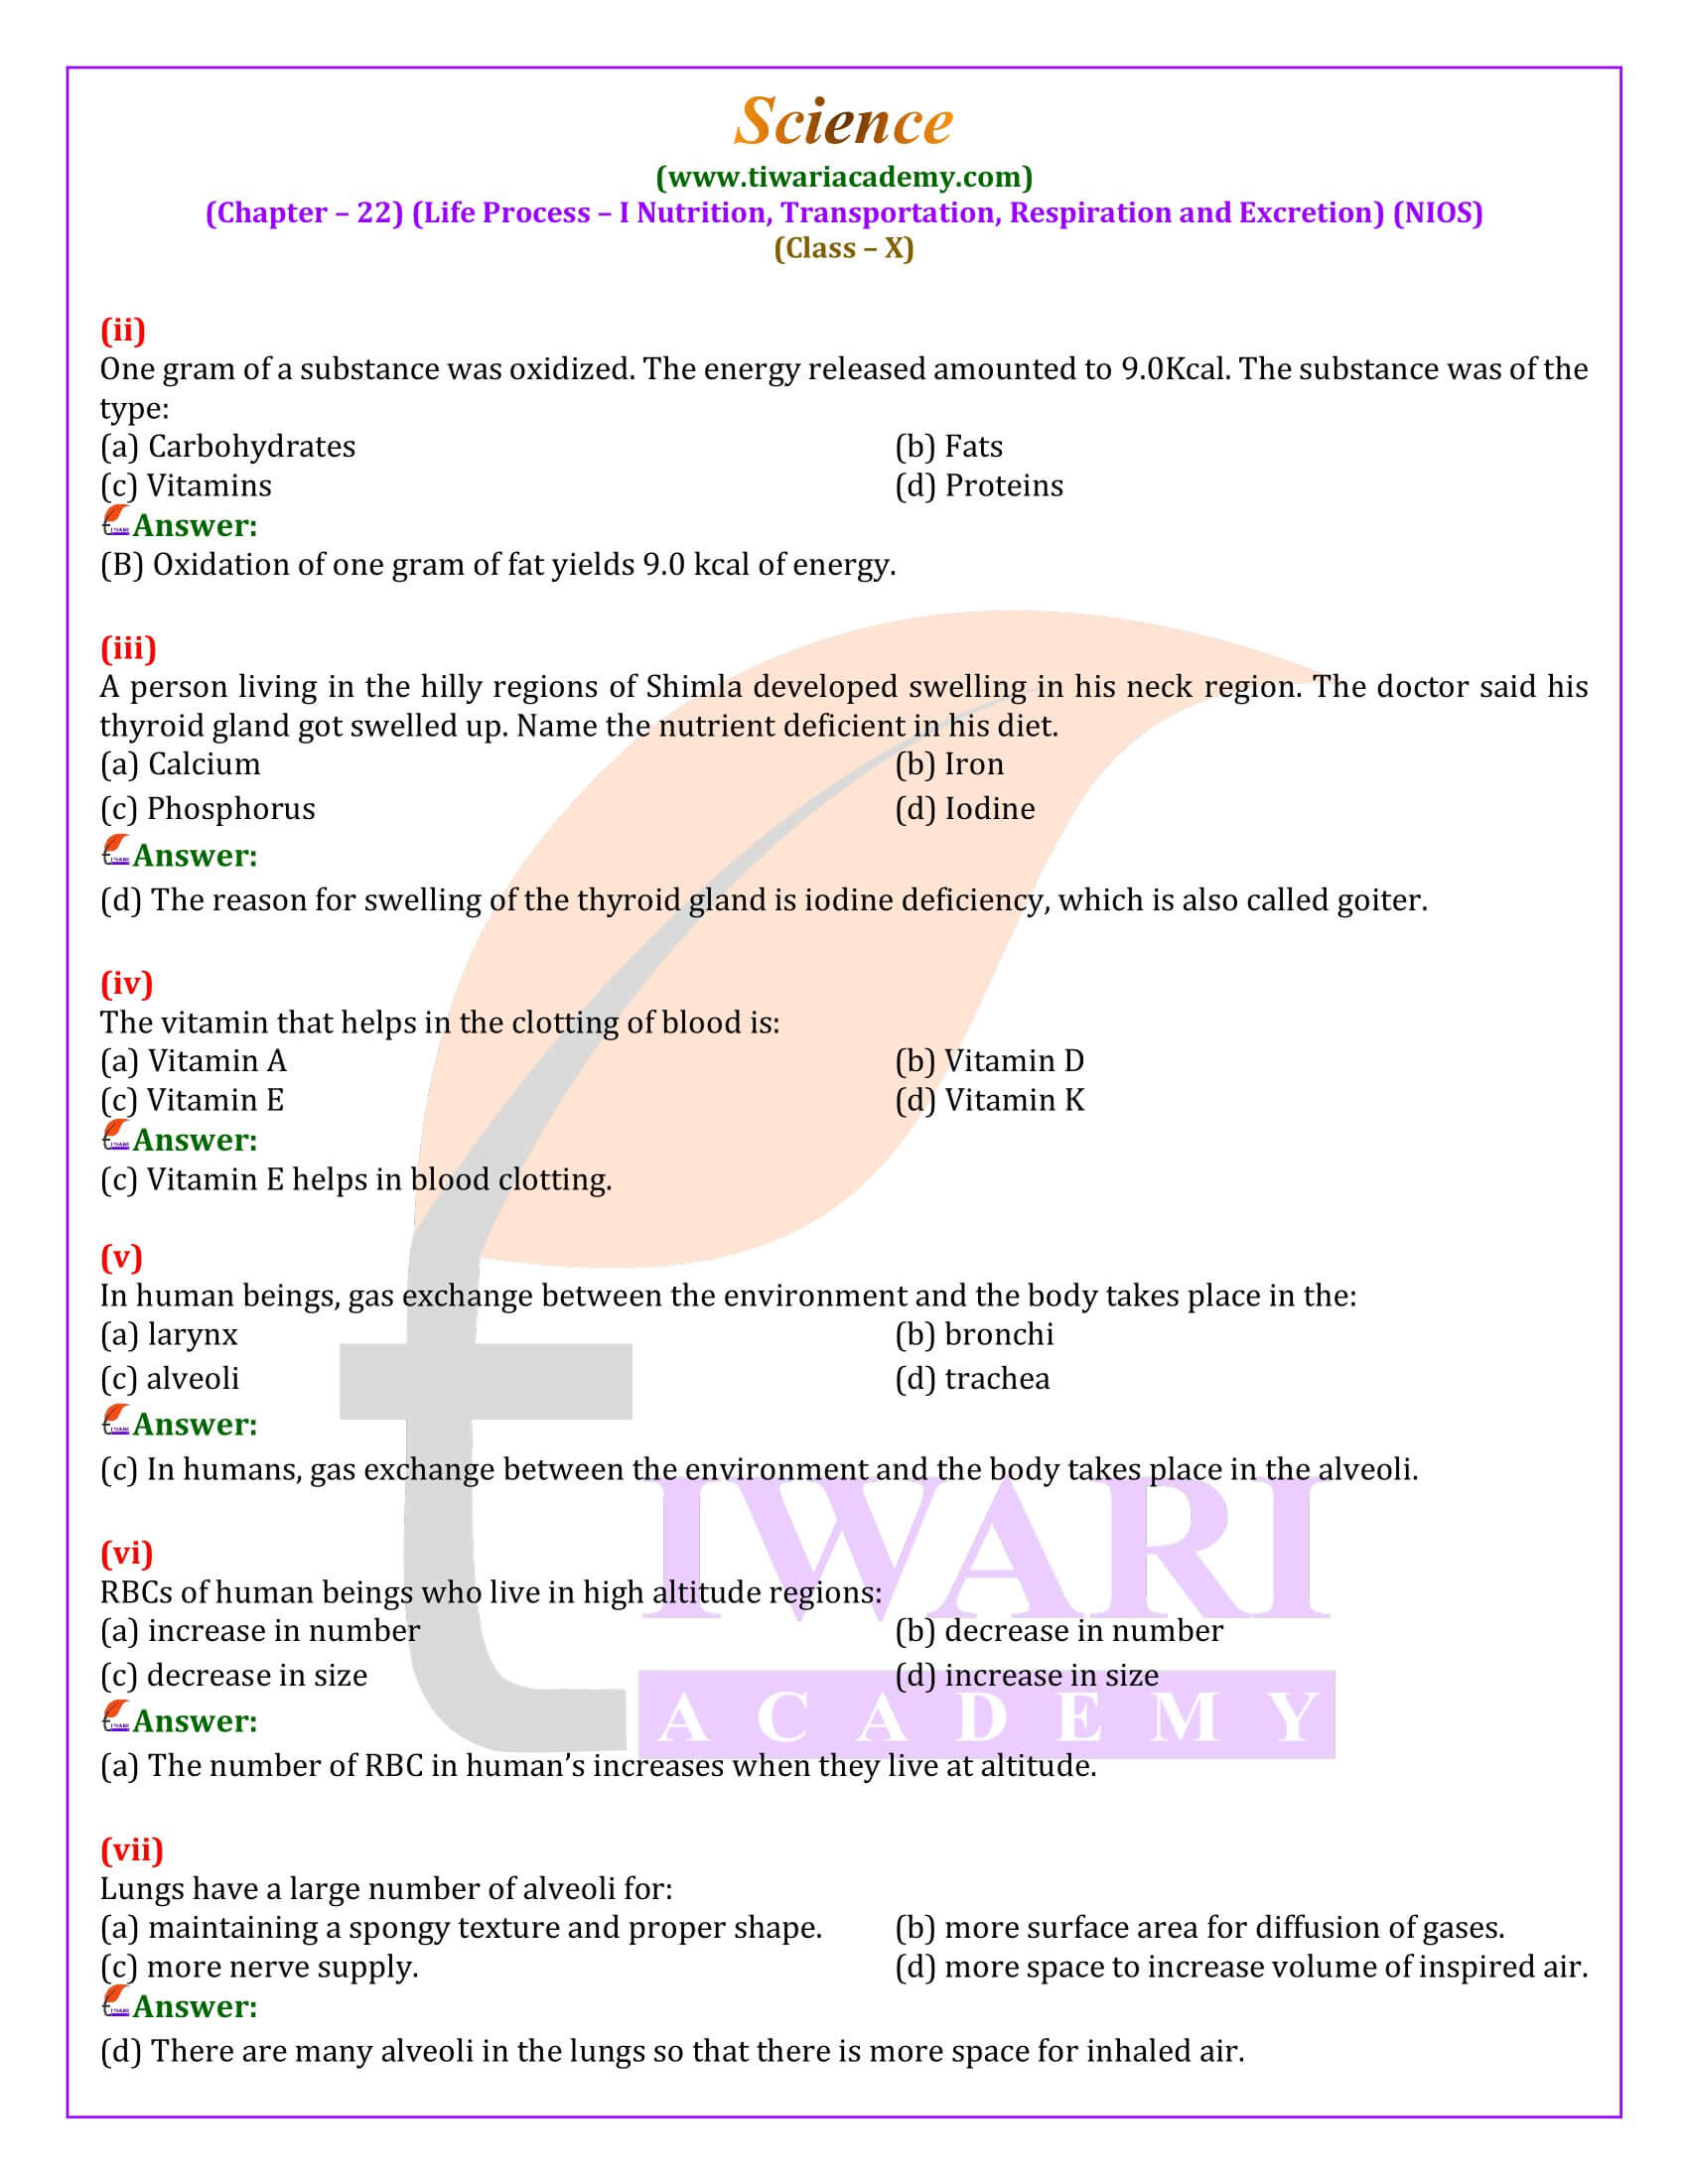 NIOS Class 10 Science Chapter 22 all questions